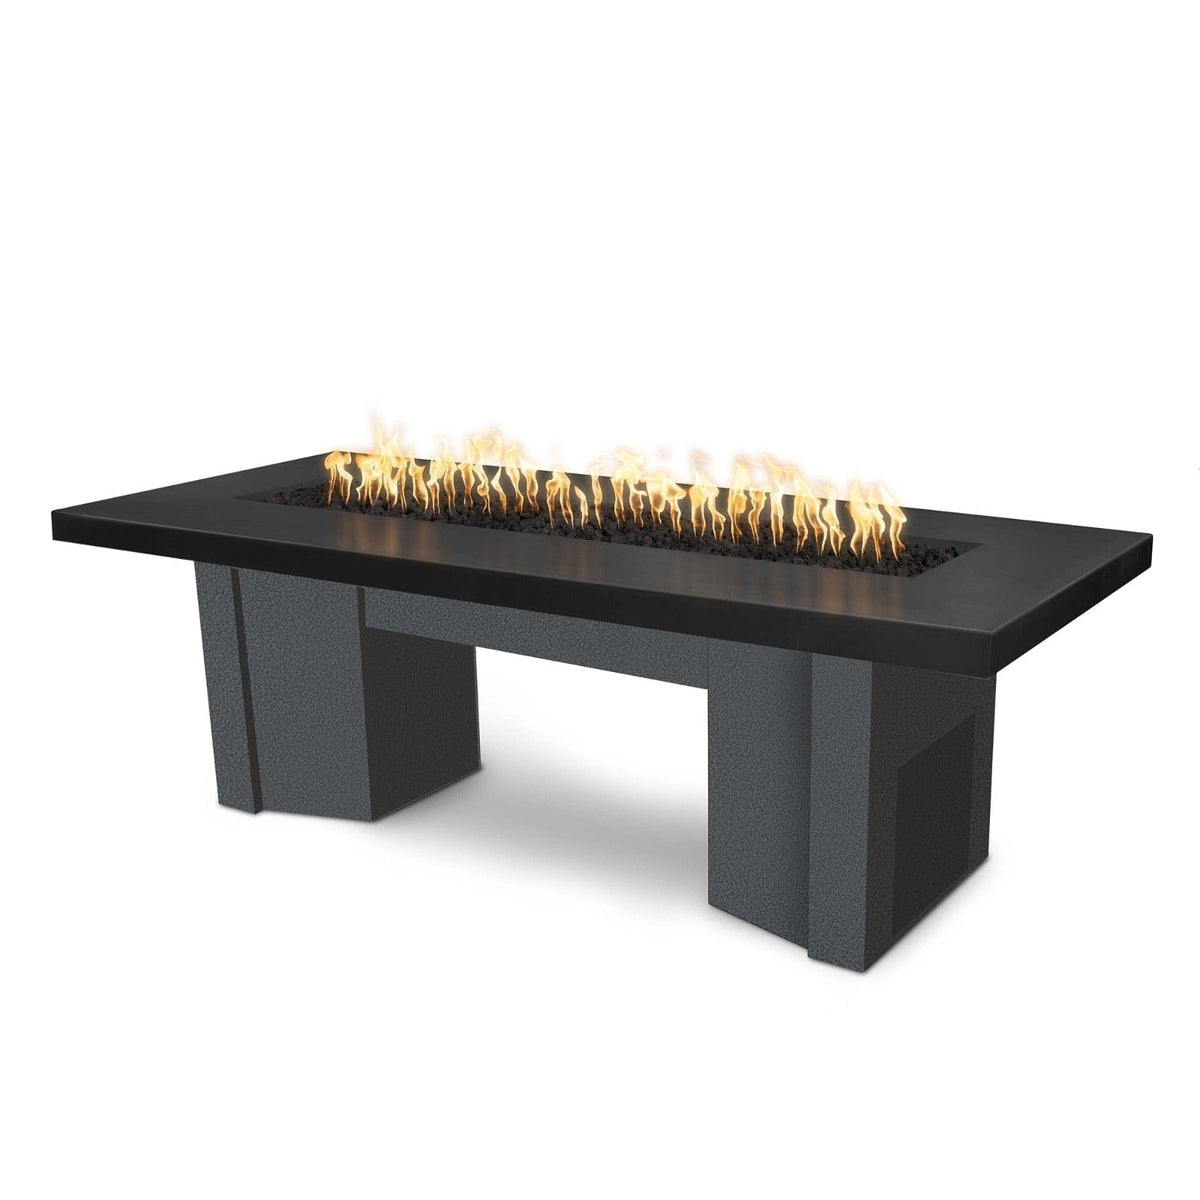 The Outdoor Plus Fire Features Black (-BLK) / Silver Vein Powder Coated Steel (-SLV) The Outdoor Plus 78&quot; Alameda Fire Table Smooth Concrete in Liquid Propane - Flame Sense System with Push Button Spark Igniter / OPT-ALMGFRC78FSEN-LP